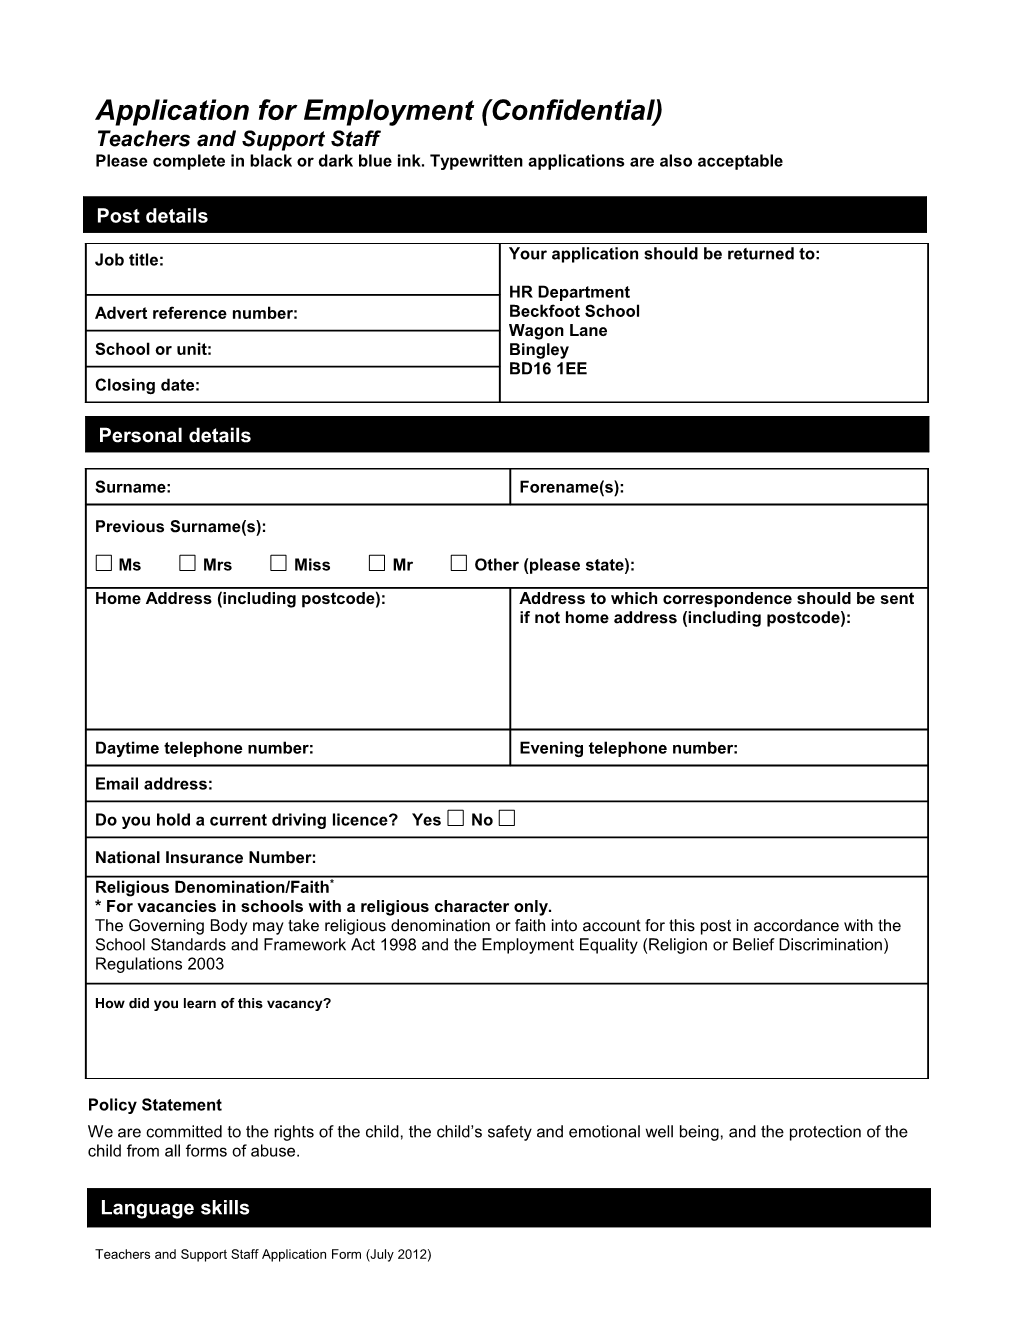 Application for Employment (Confidential) s1